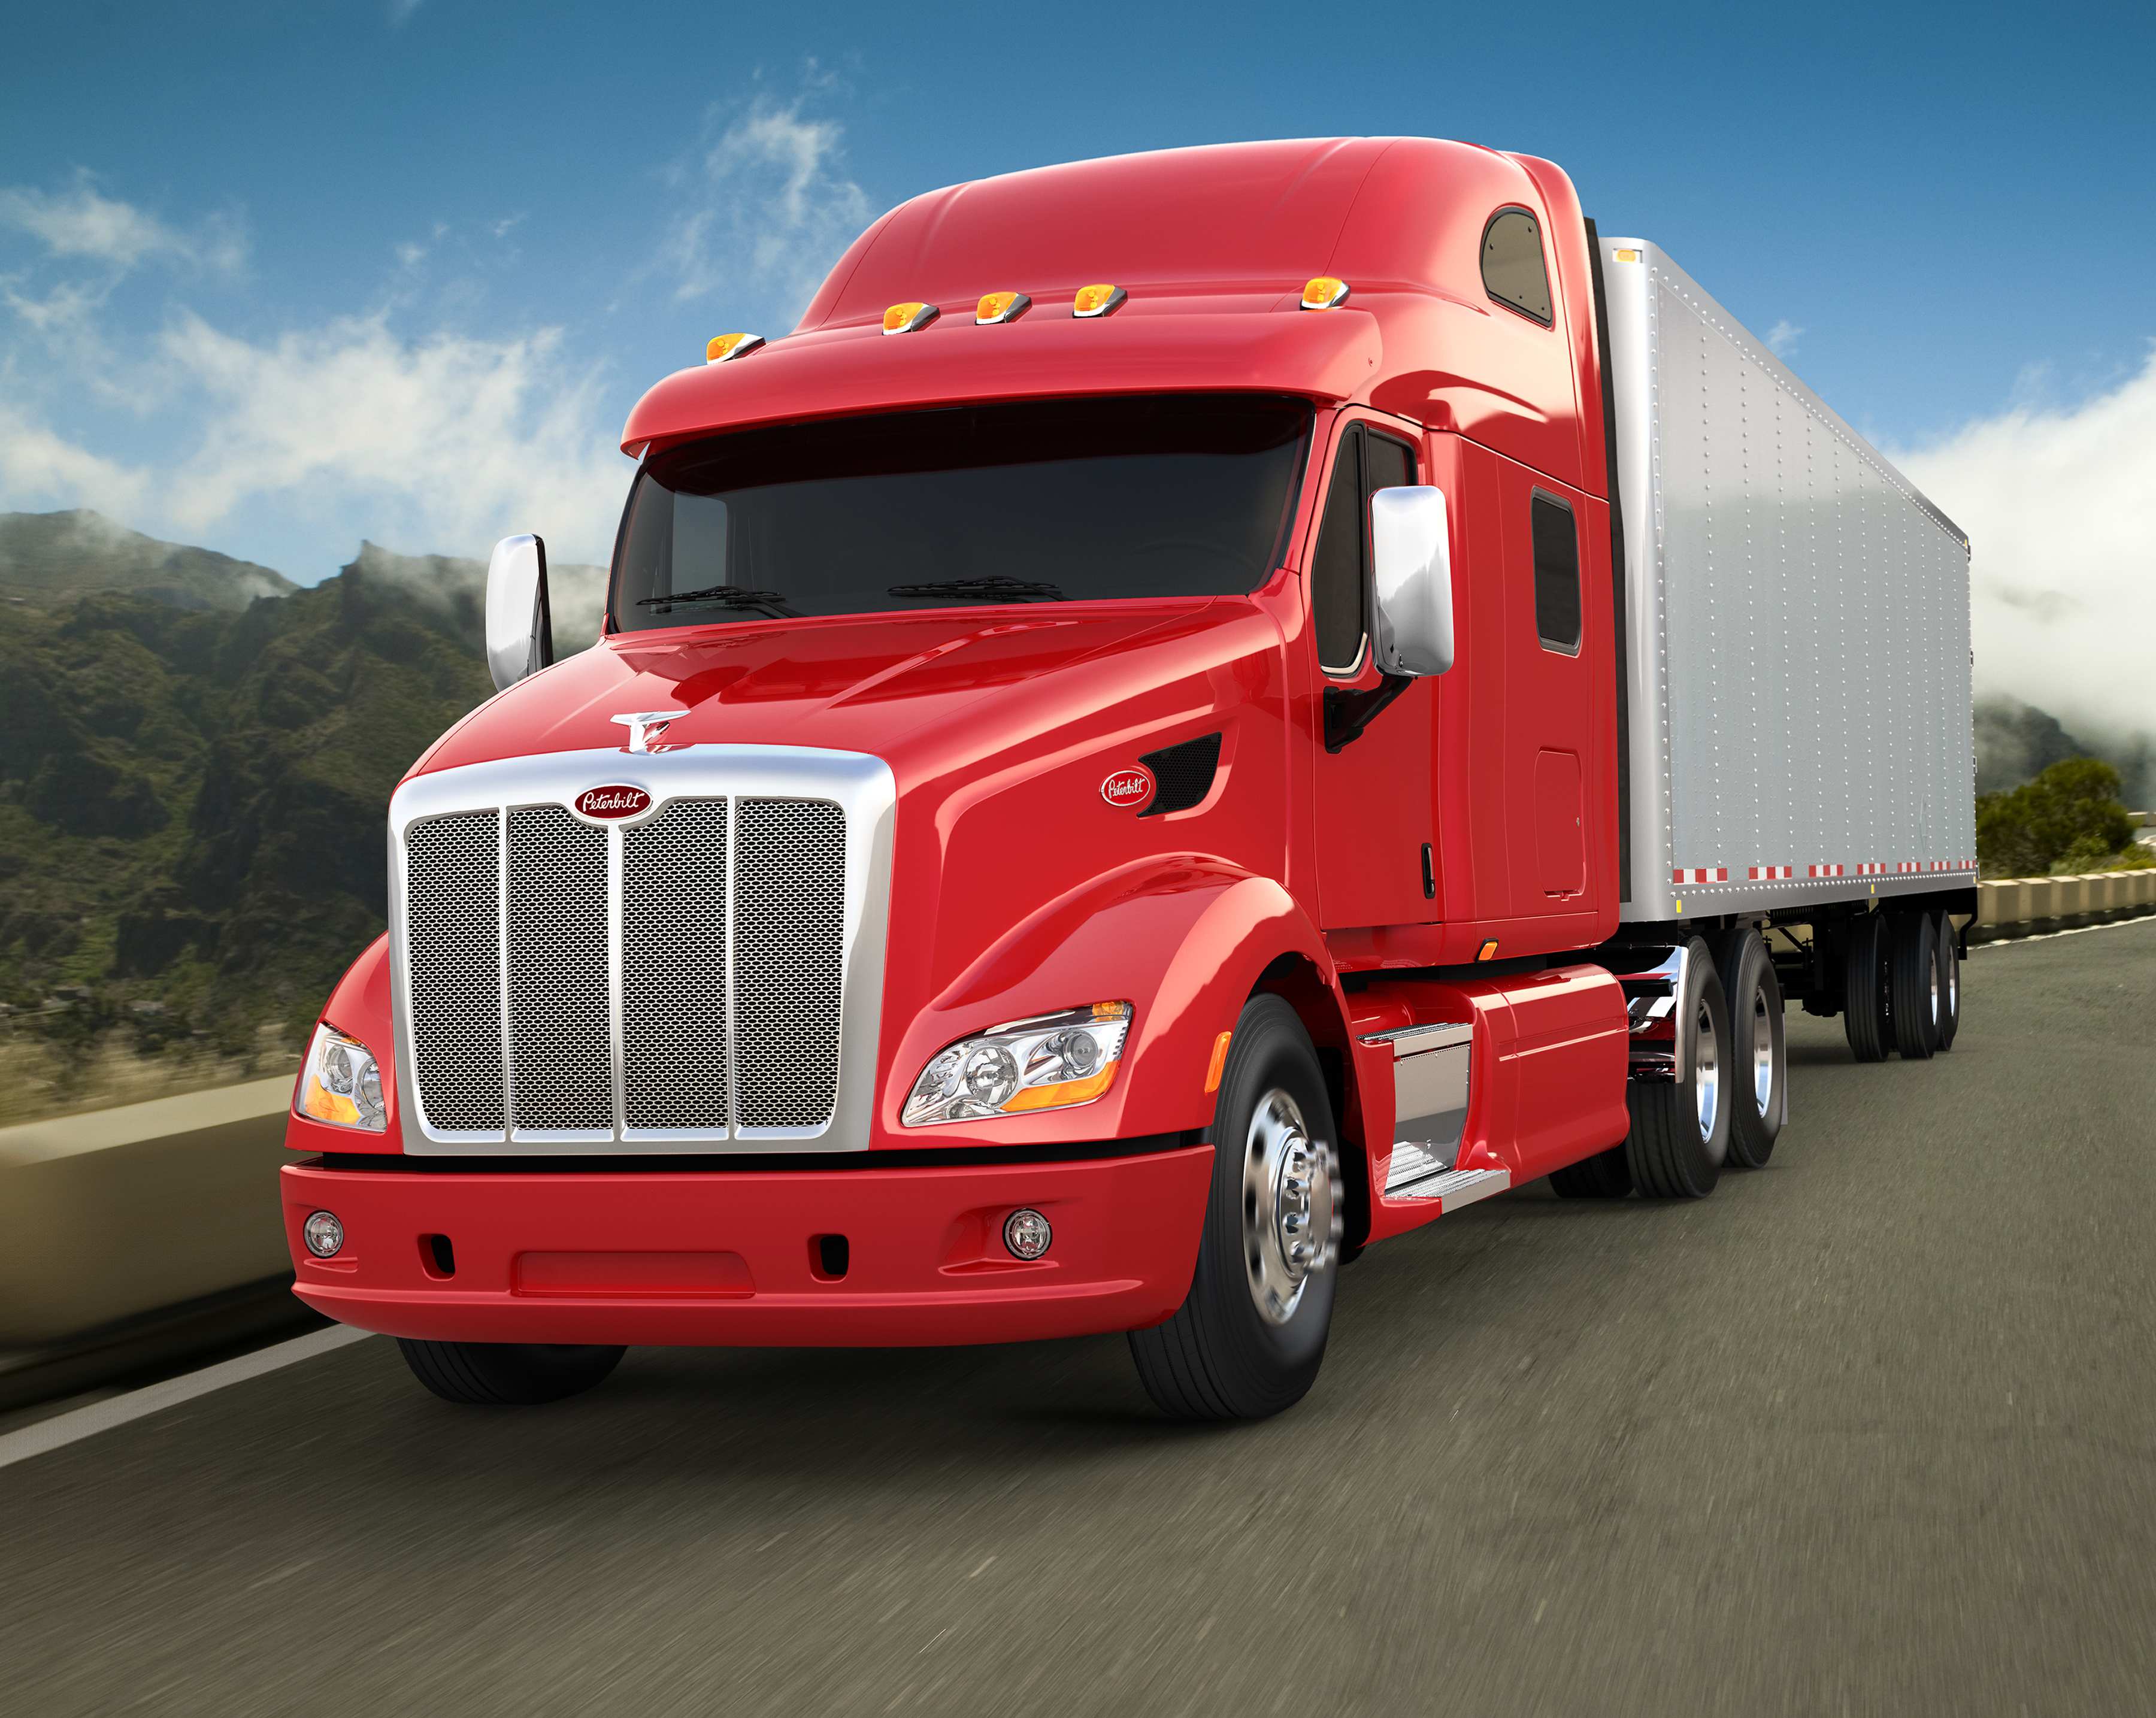 Paccar issues recall for some 2014 Kenworth, Peterbilt trucks